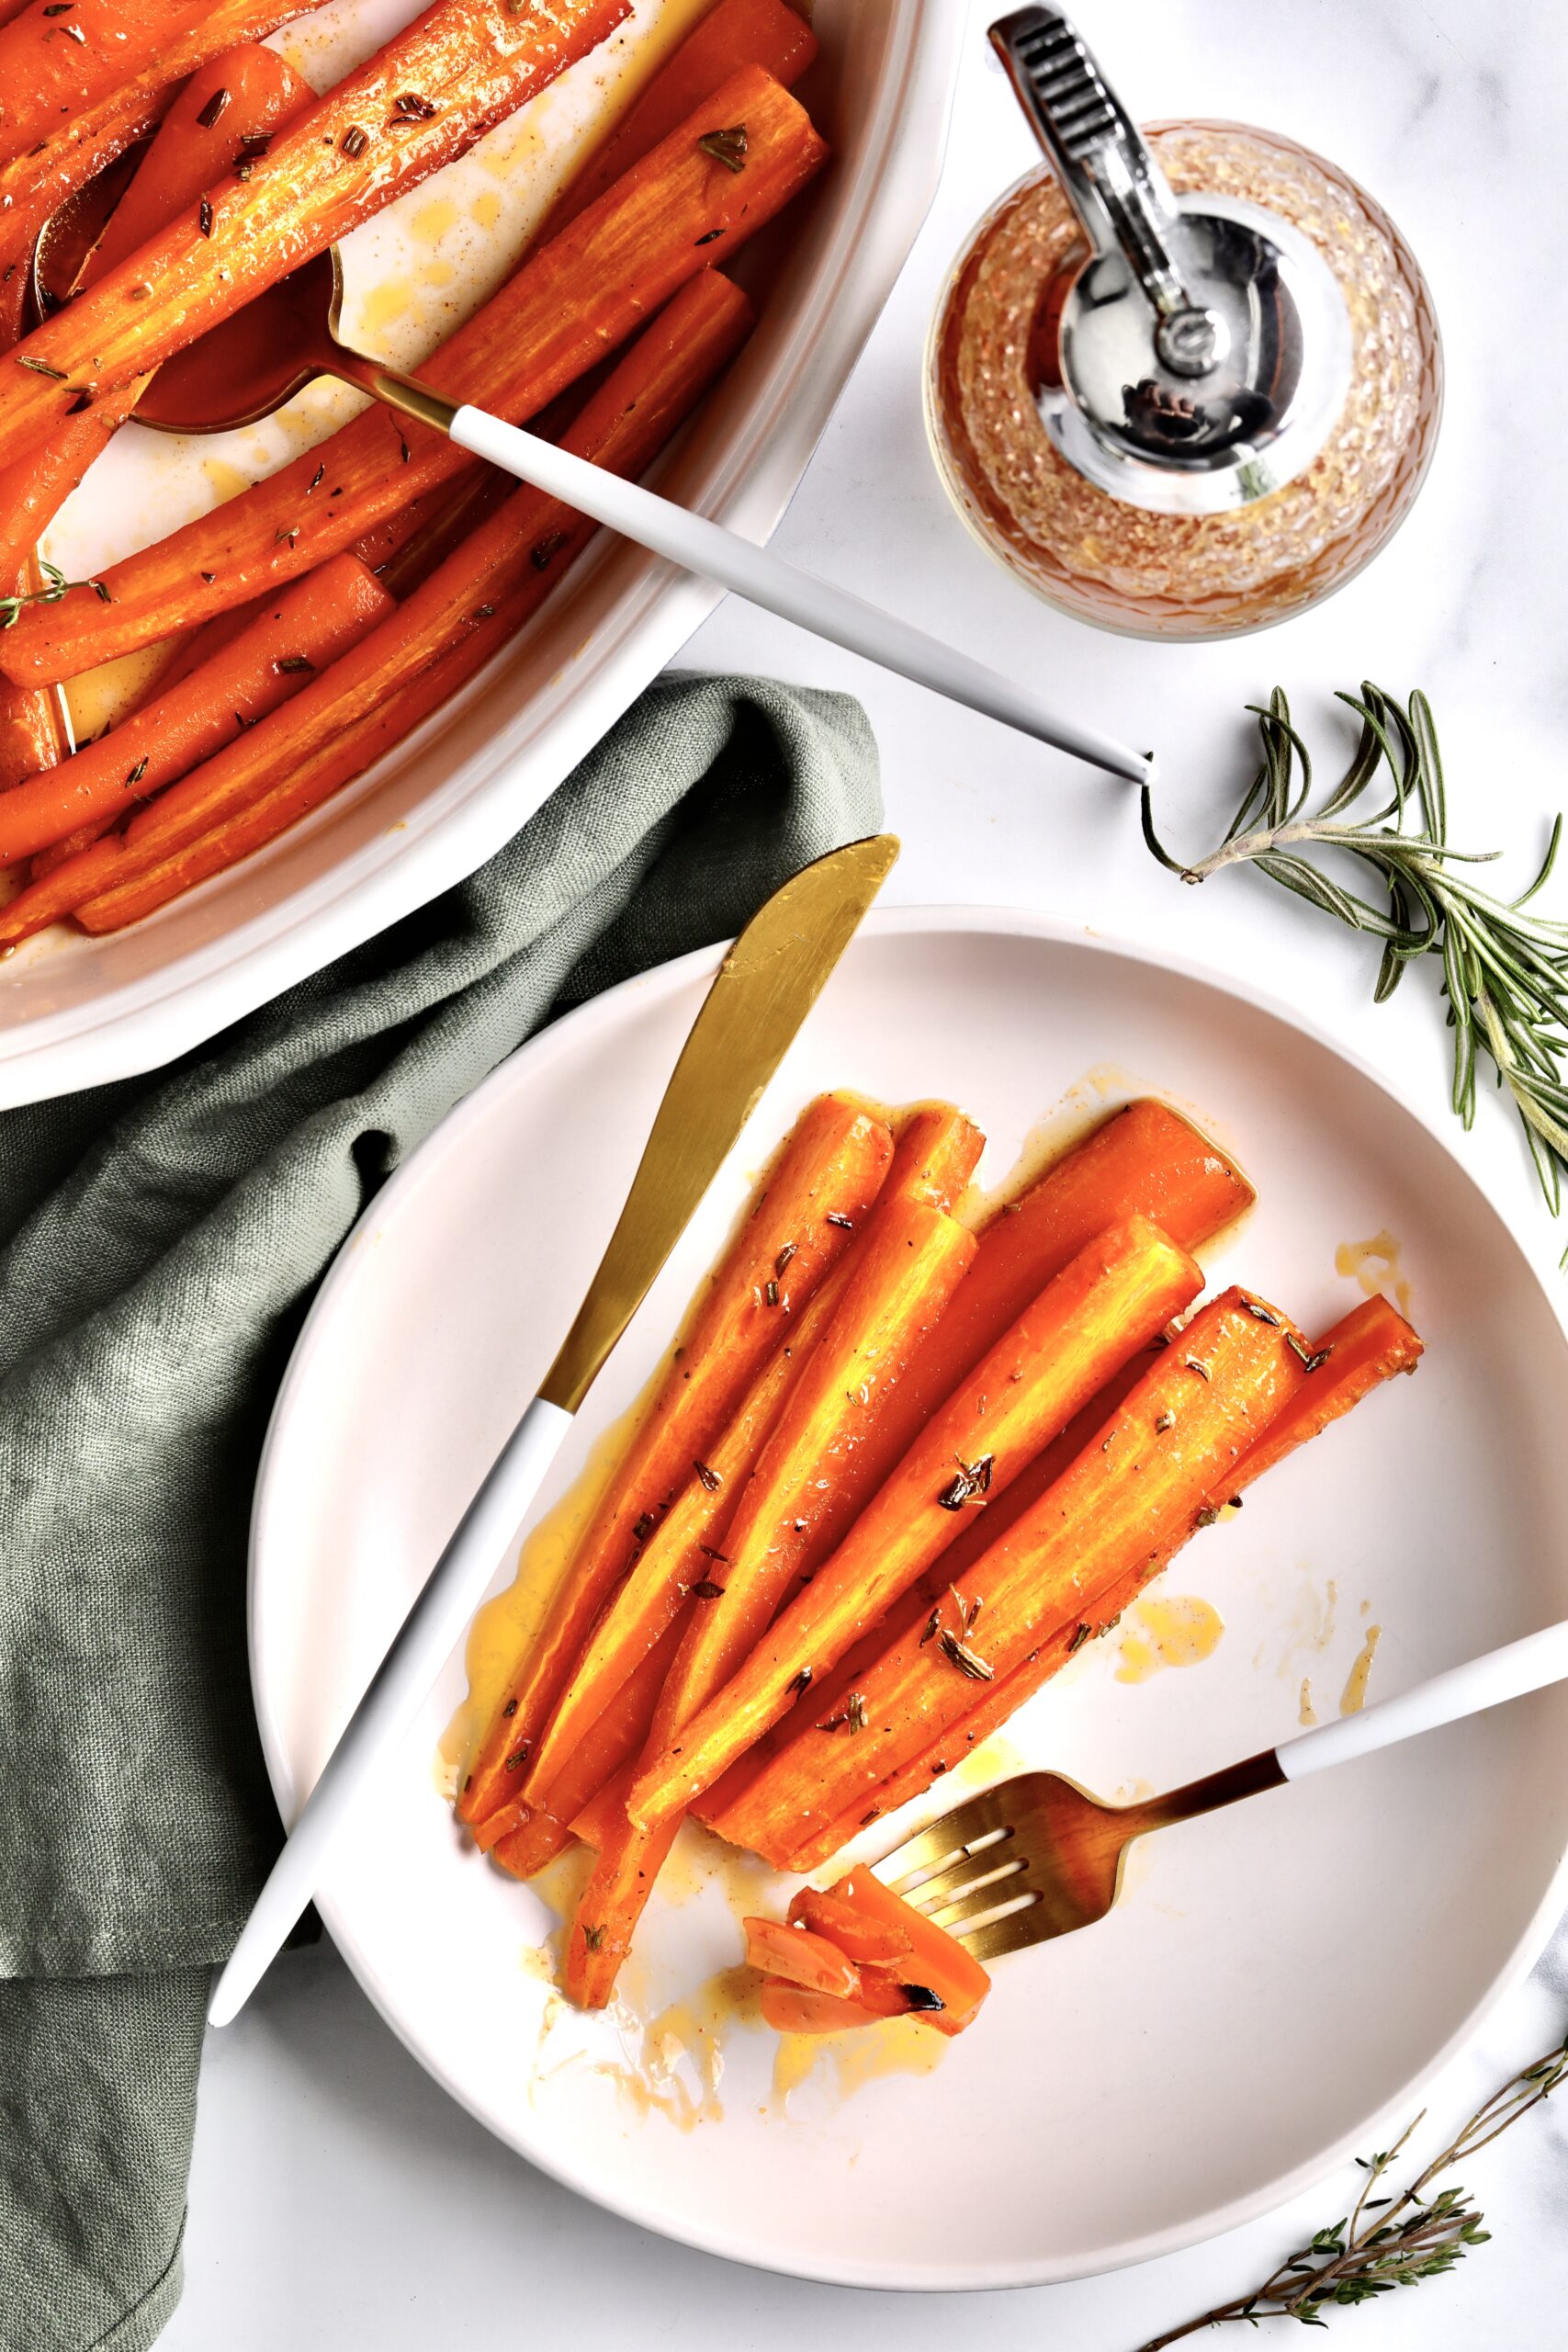 Best Honey Glazed Carrots Recipe (Oven Roasted) on a plate with fork and knife. A jar of honey and herbs in the background.